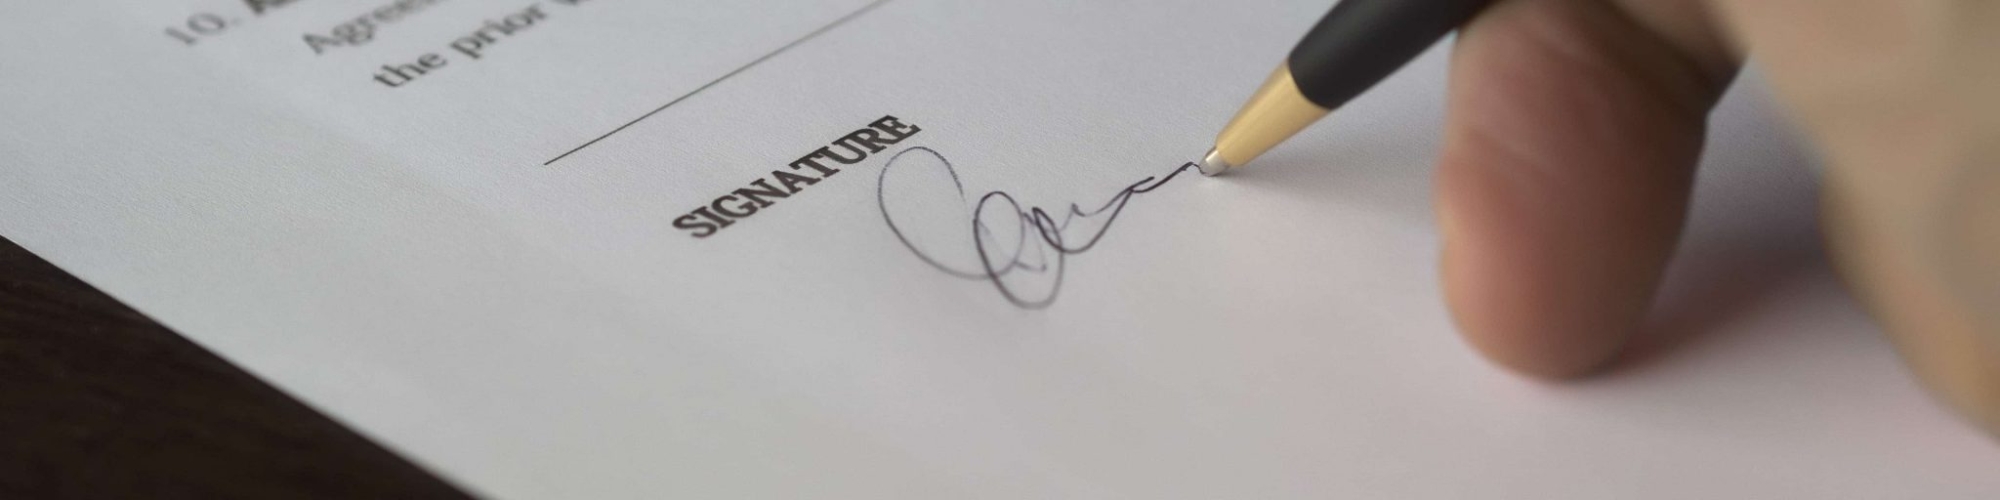 How to create an electronic signature